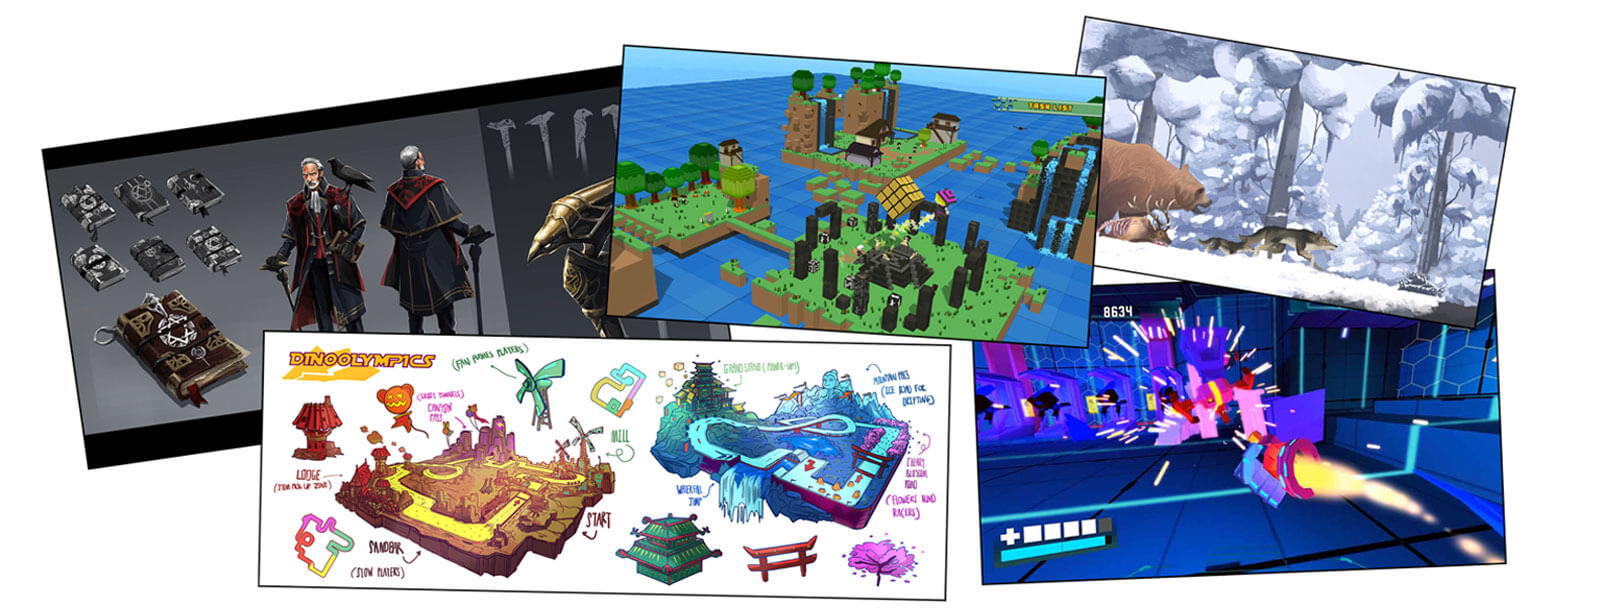 A collage of images ranging from concept artwork to in-game screenshots of student projects.